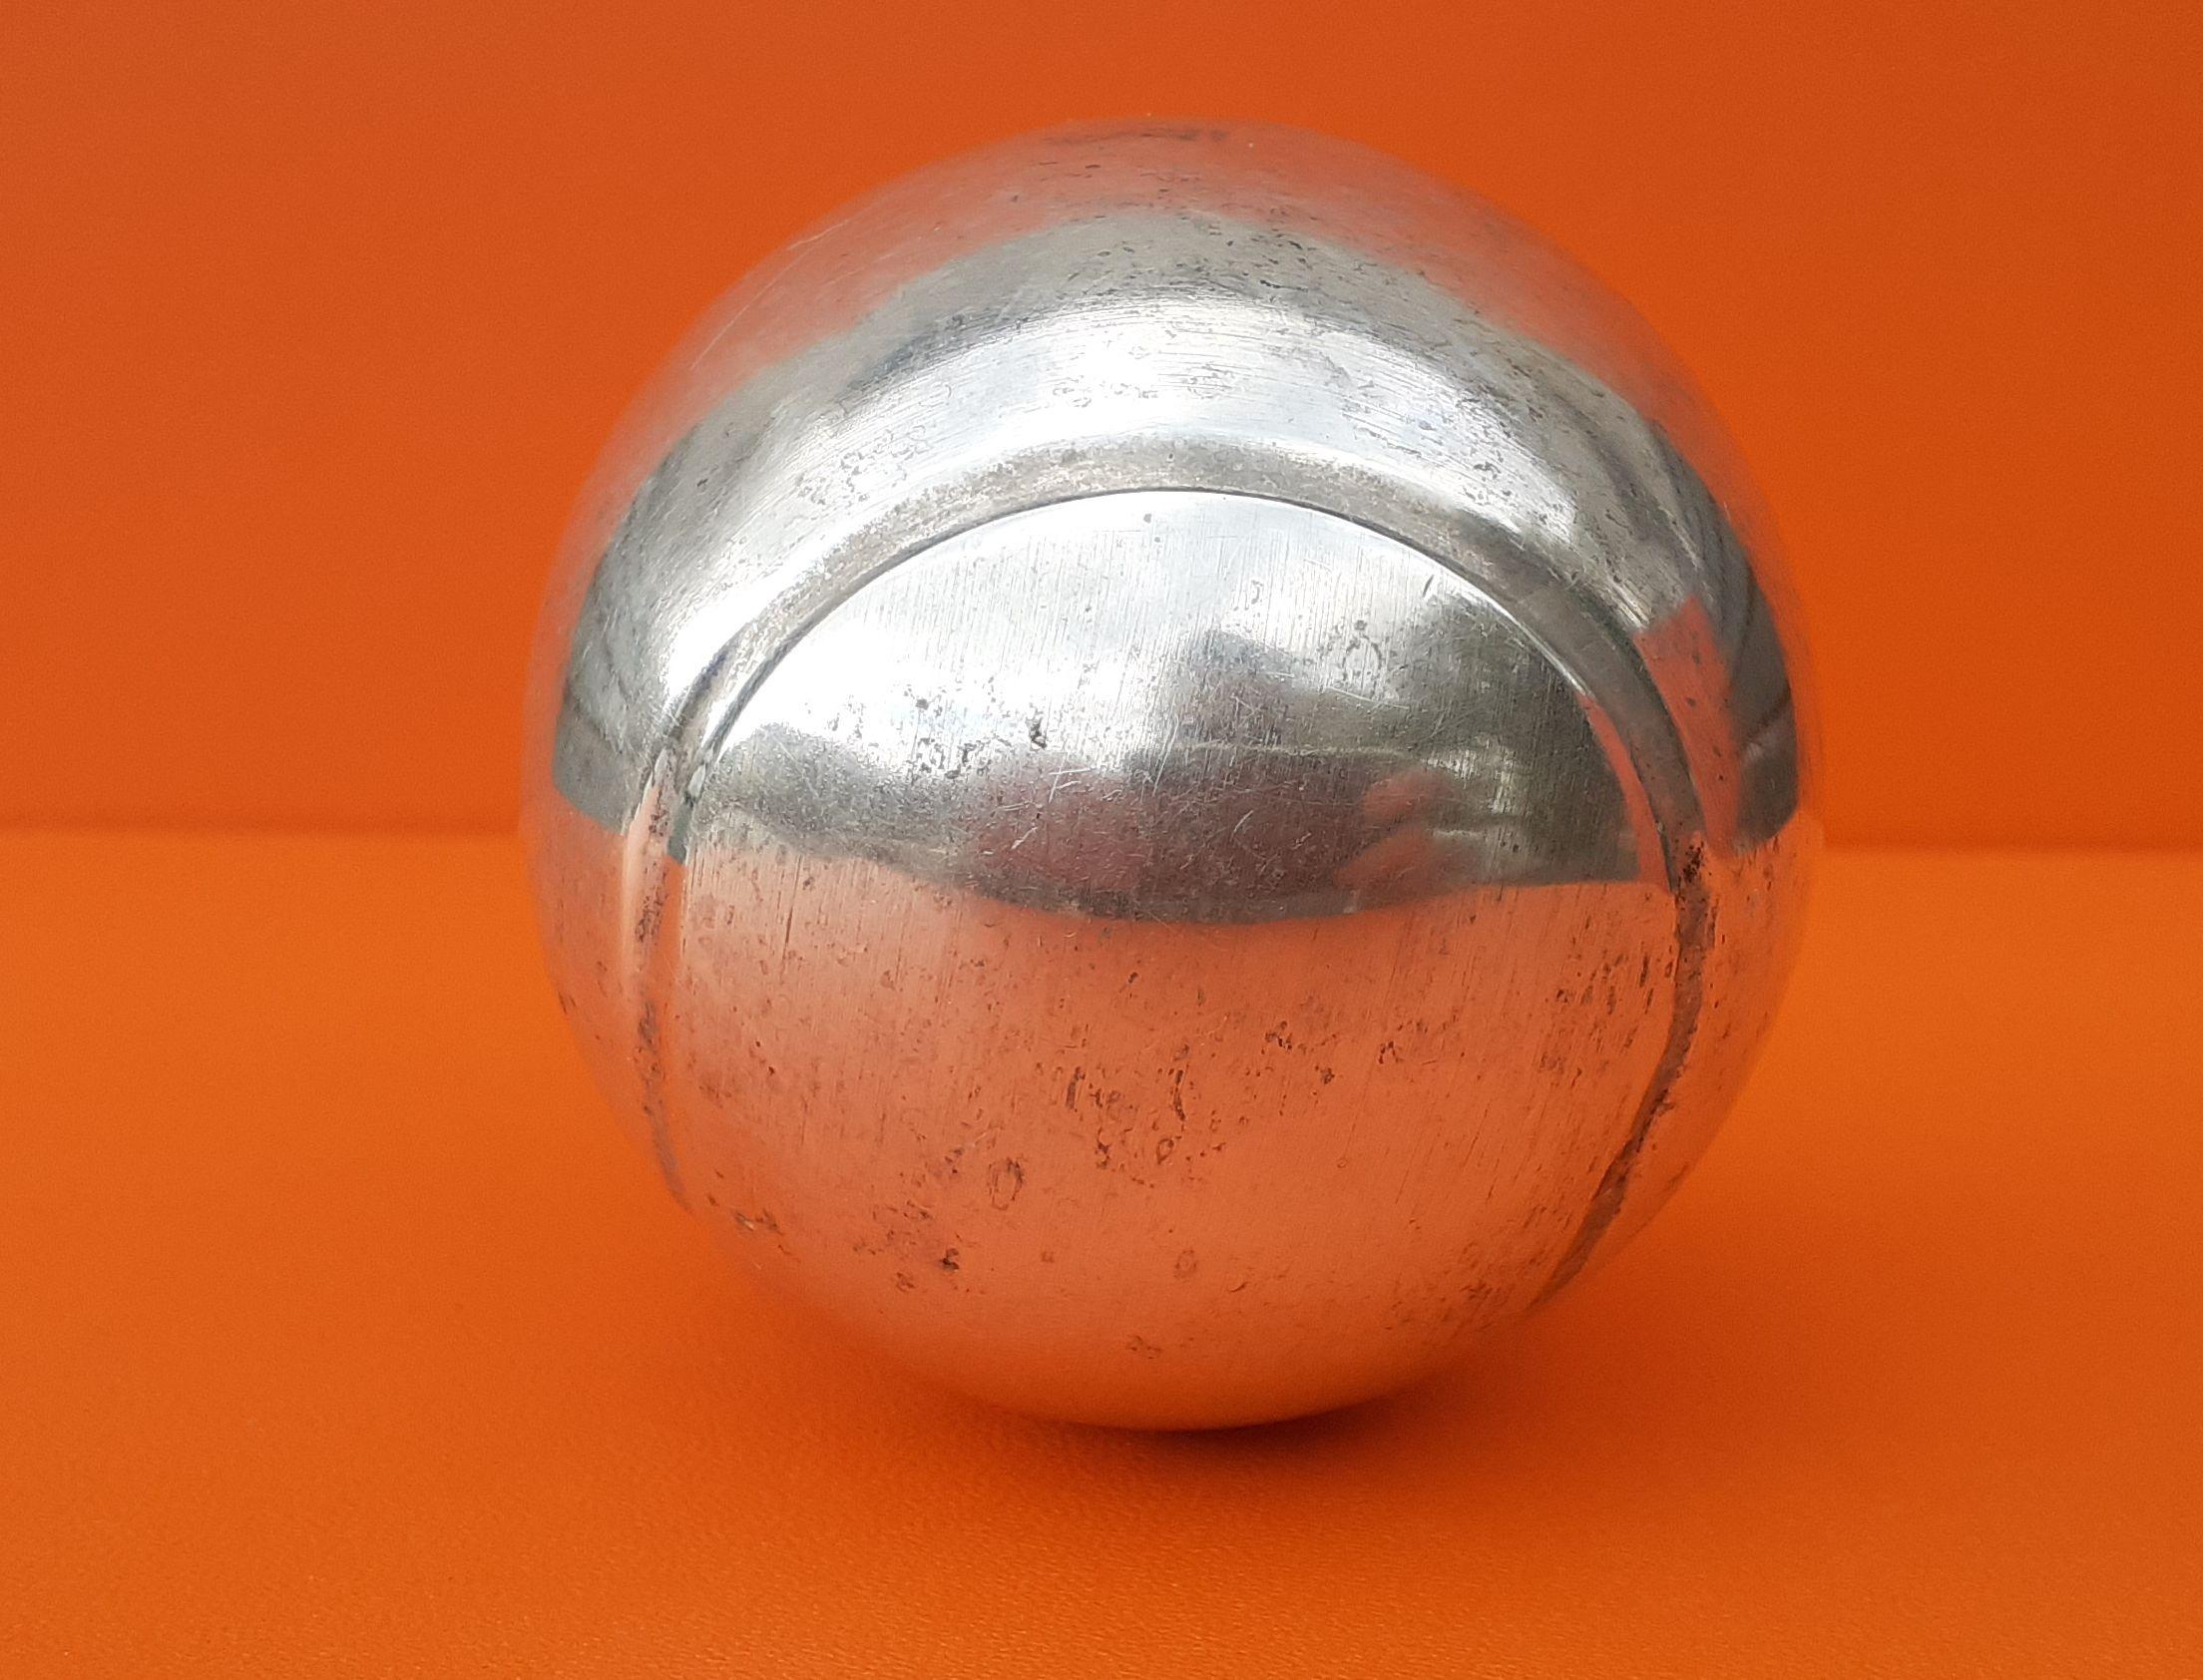 Exceptional Authentic Hermès Tennis Ball

Vintage item

Can be used as paperweight

Made of Silver-Tone Metal

